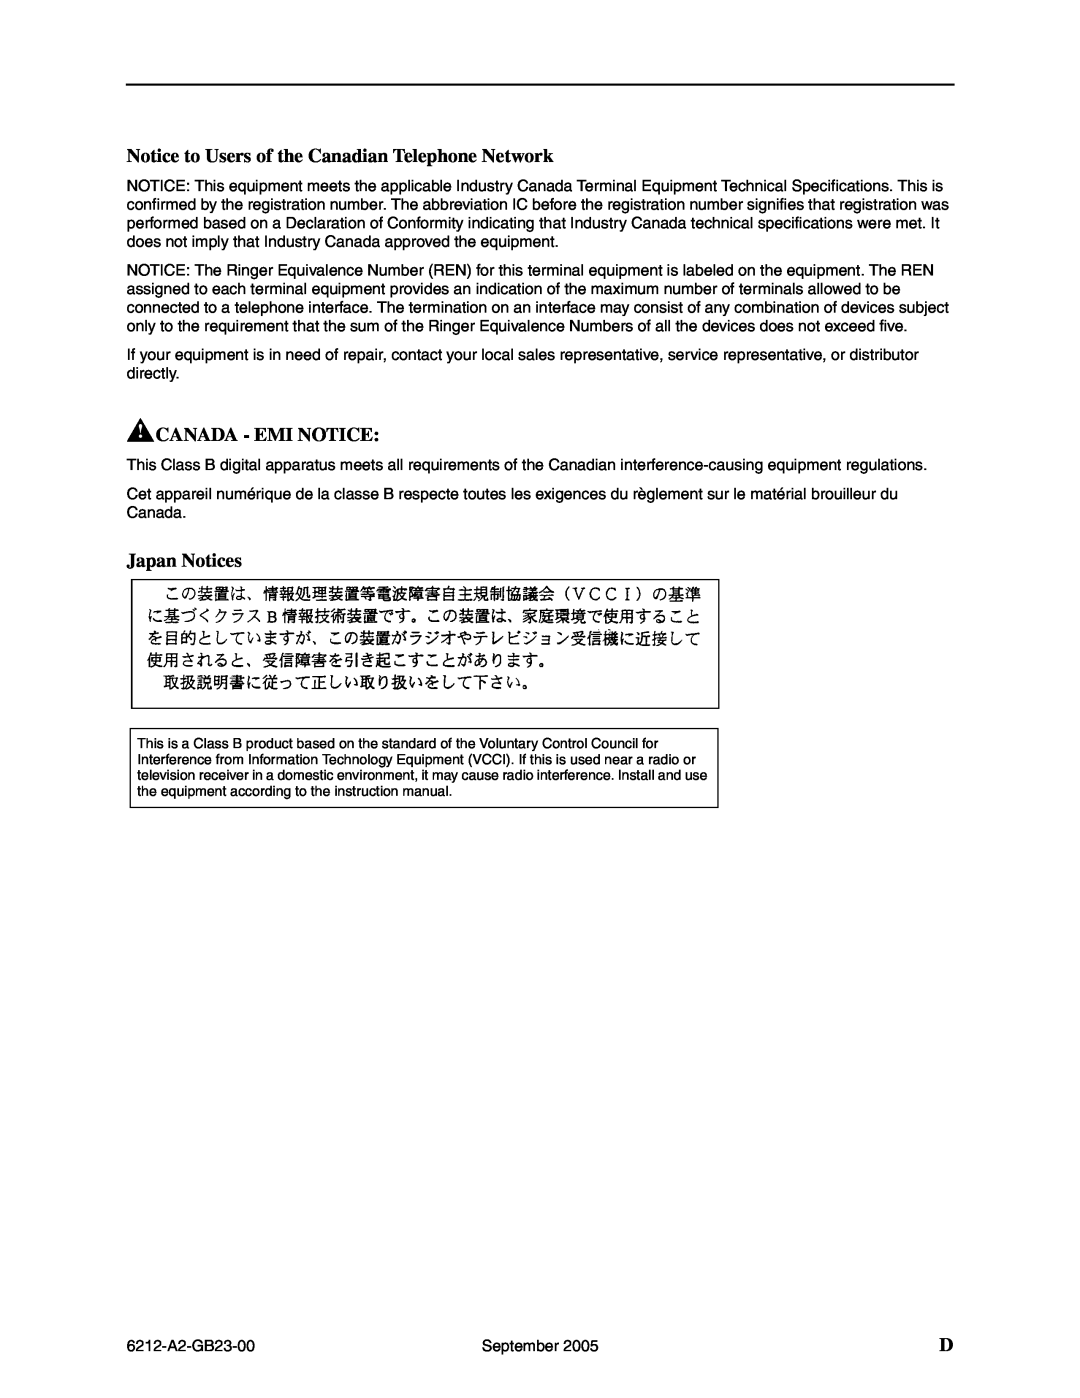 Paradyne 6212-I1 manual Notice to Users of the Canadian Telephone Network, Canada - Emi Notice, Japan Notices 